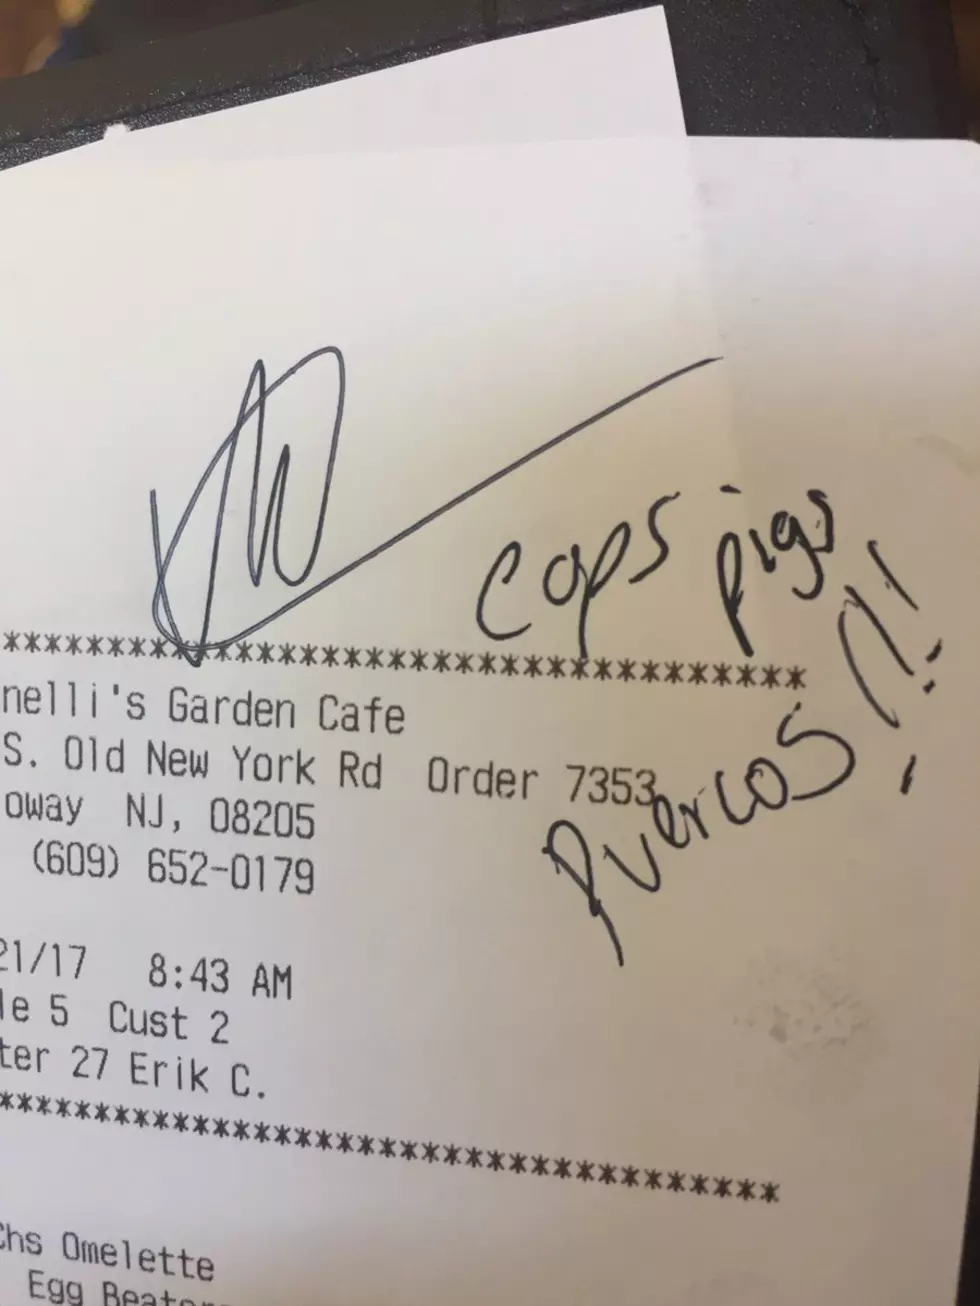 Galloway Restaurant Apologizes for Offensive Police Receipt